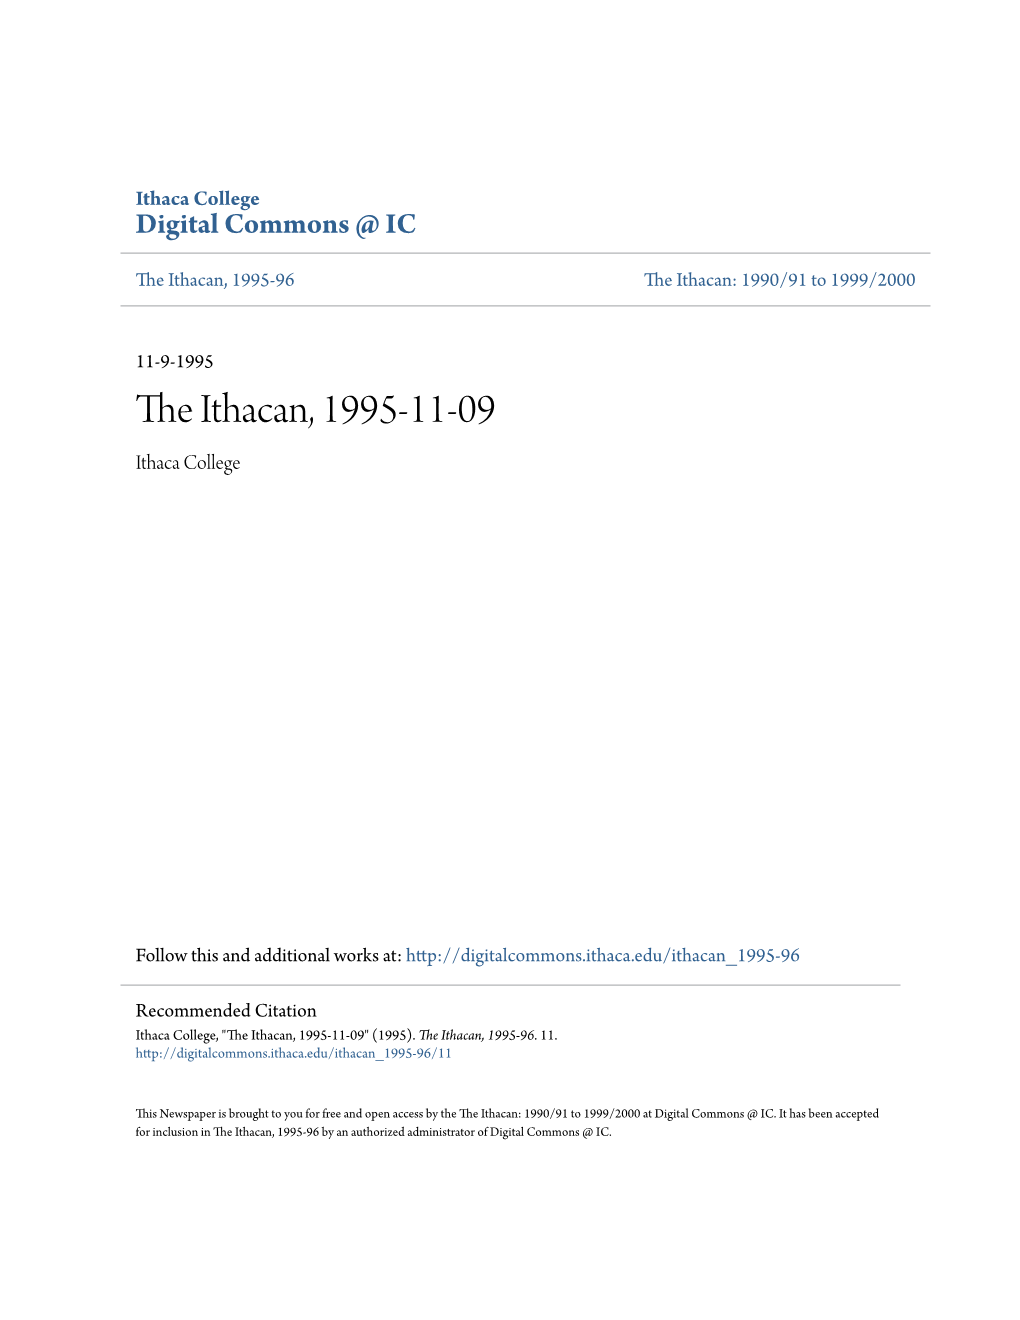 The Ithacan, 1995-11-09